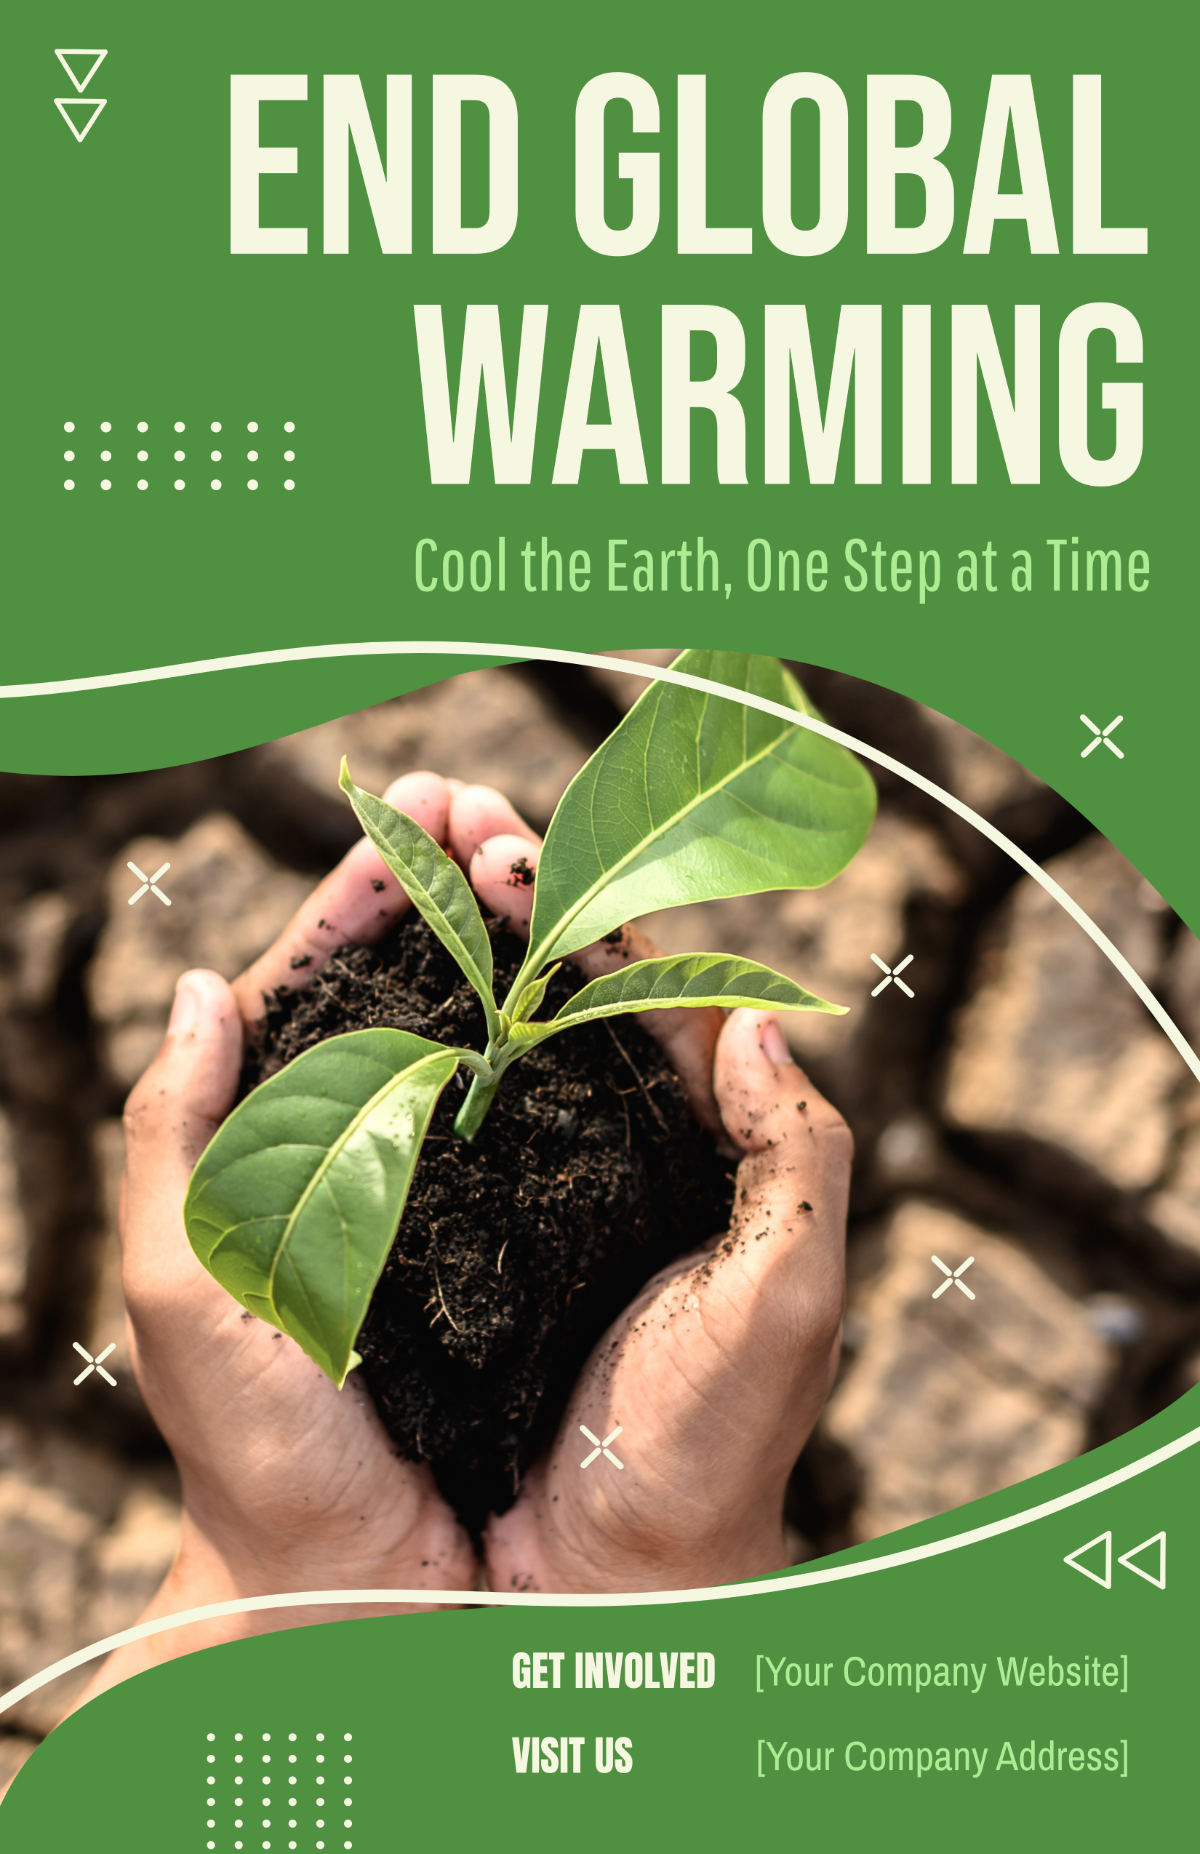 Global Warming Poster with Slogan